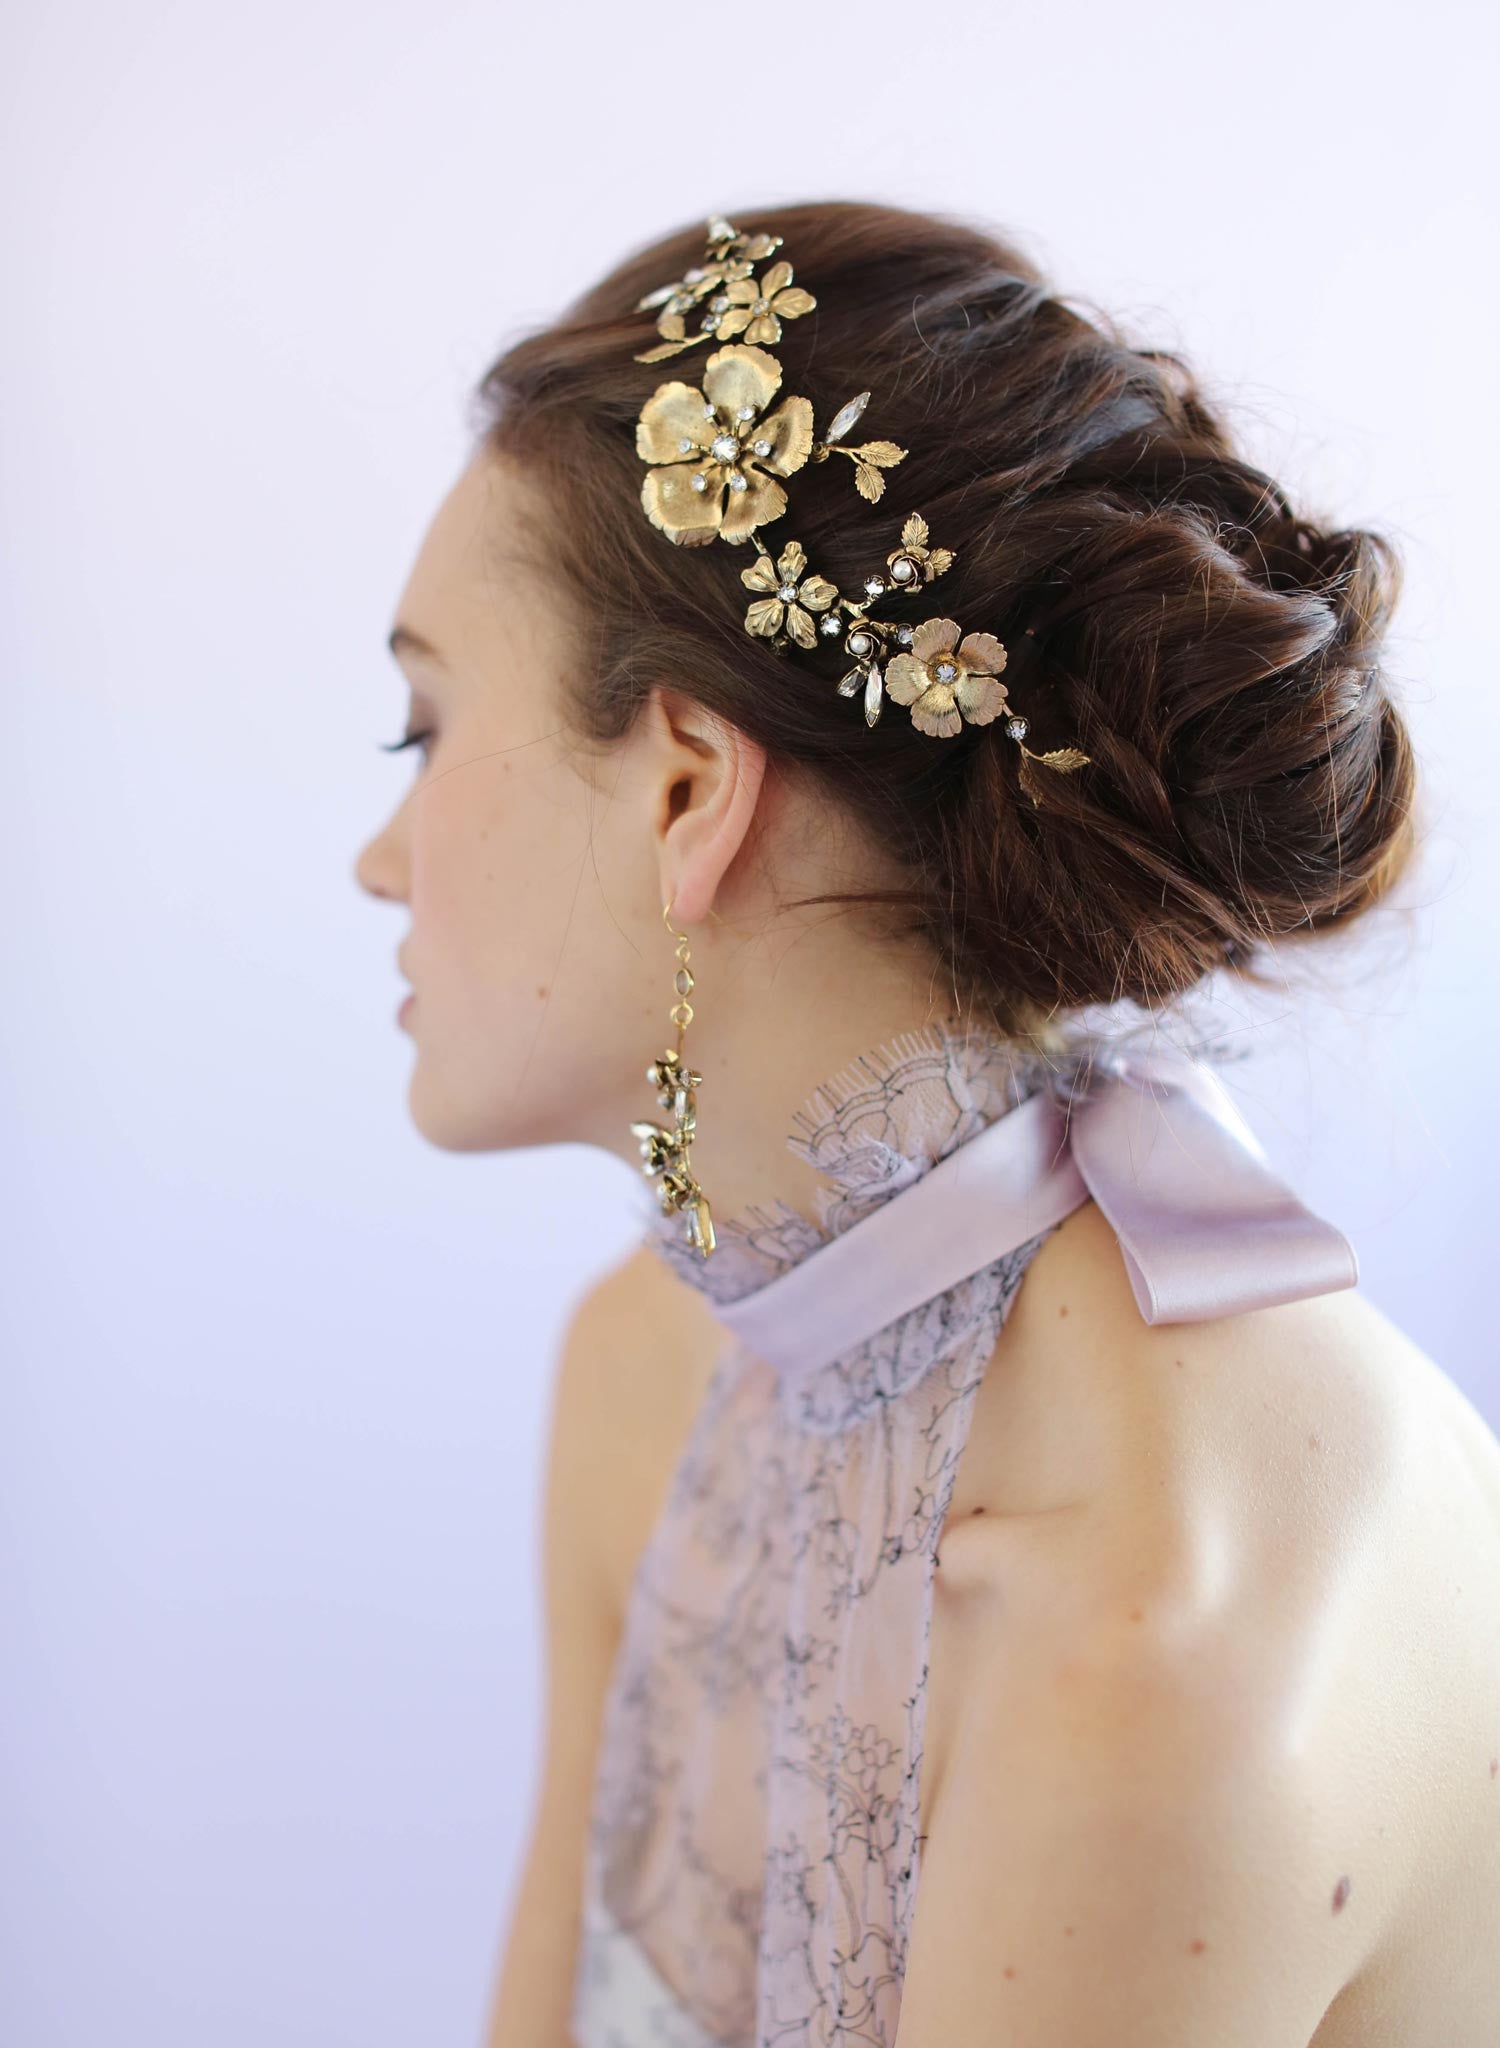 Dogwood flower and rose headpiece - Style #642